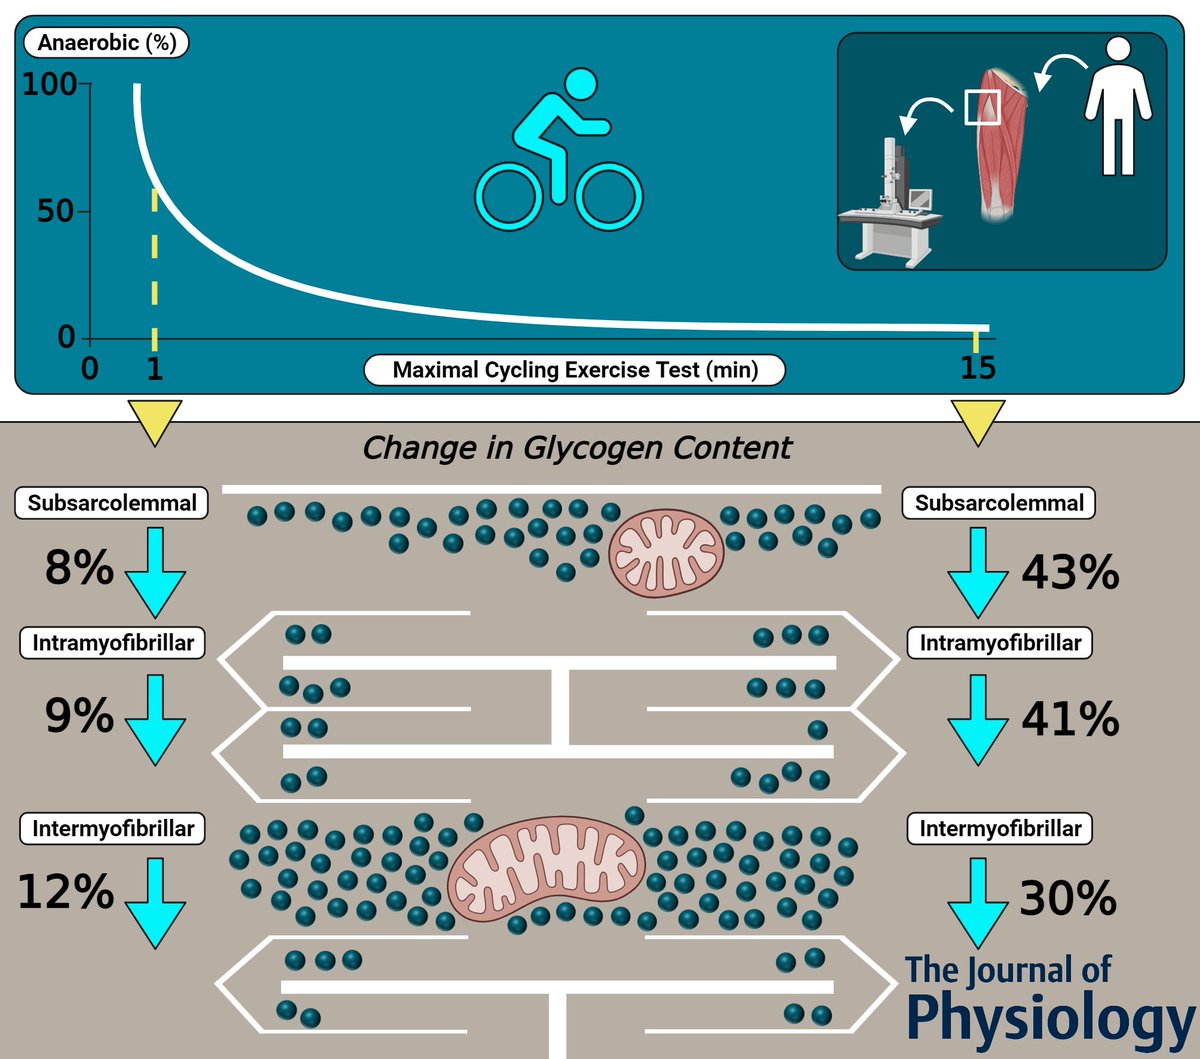 New article from my PhD in @JPhysiol! physoc.onlinelibrary.wiley.com/doi/full/10.11… We compared utilization of the three subcellular pools of glycogen during 1- and 15-min maximal exercise. 1/5